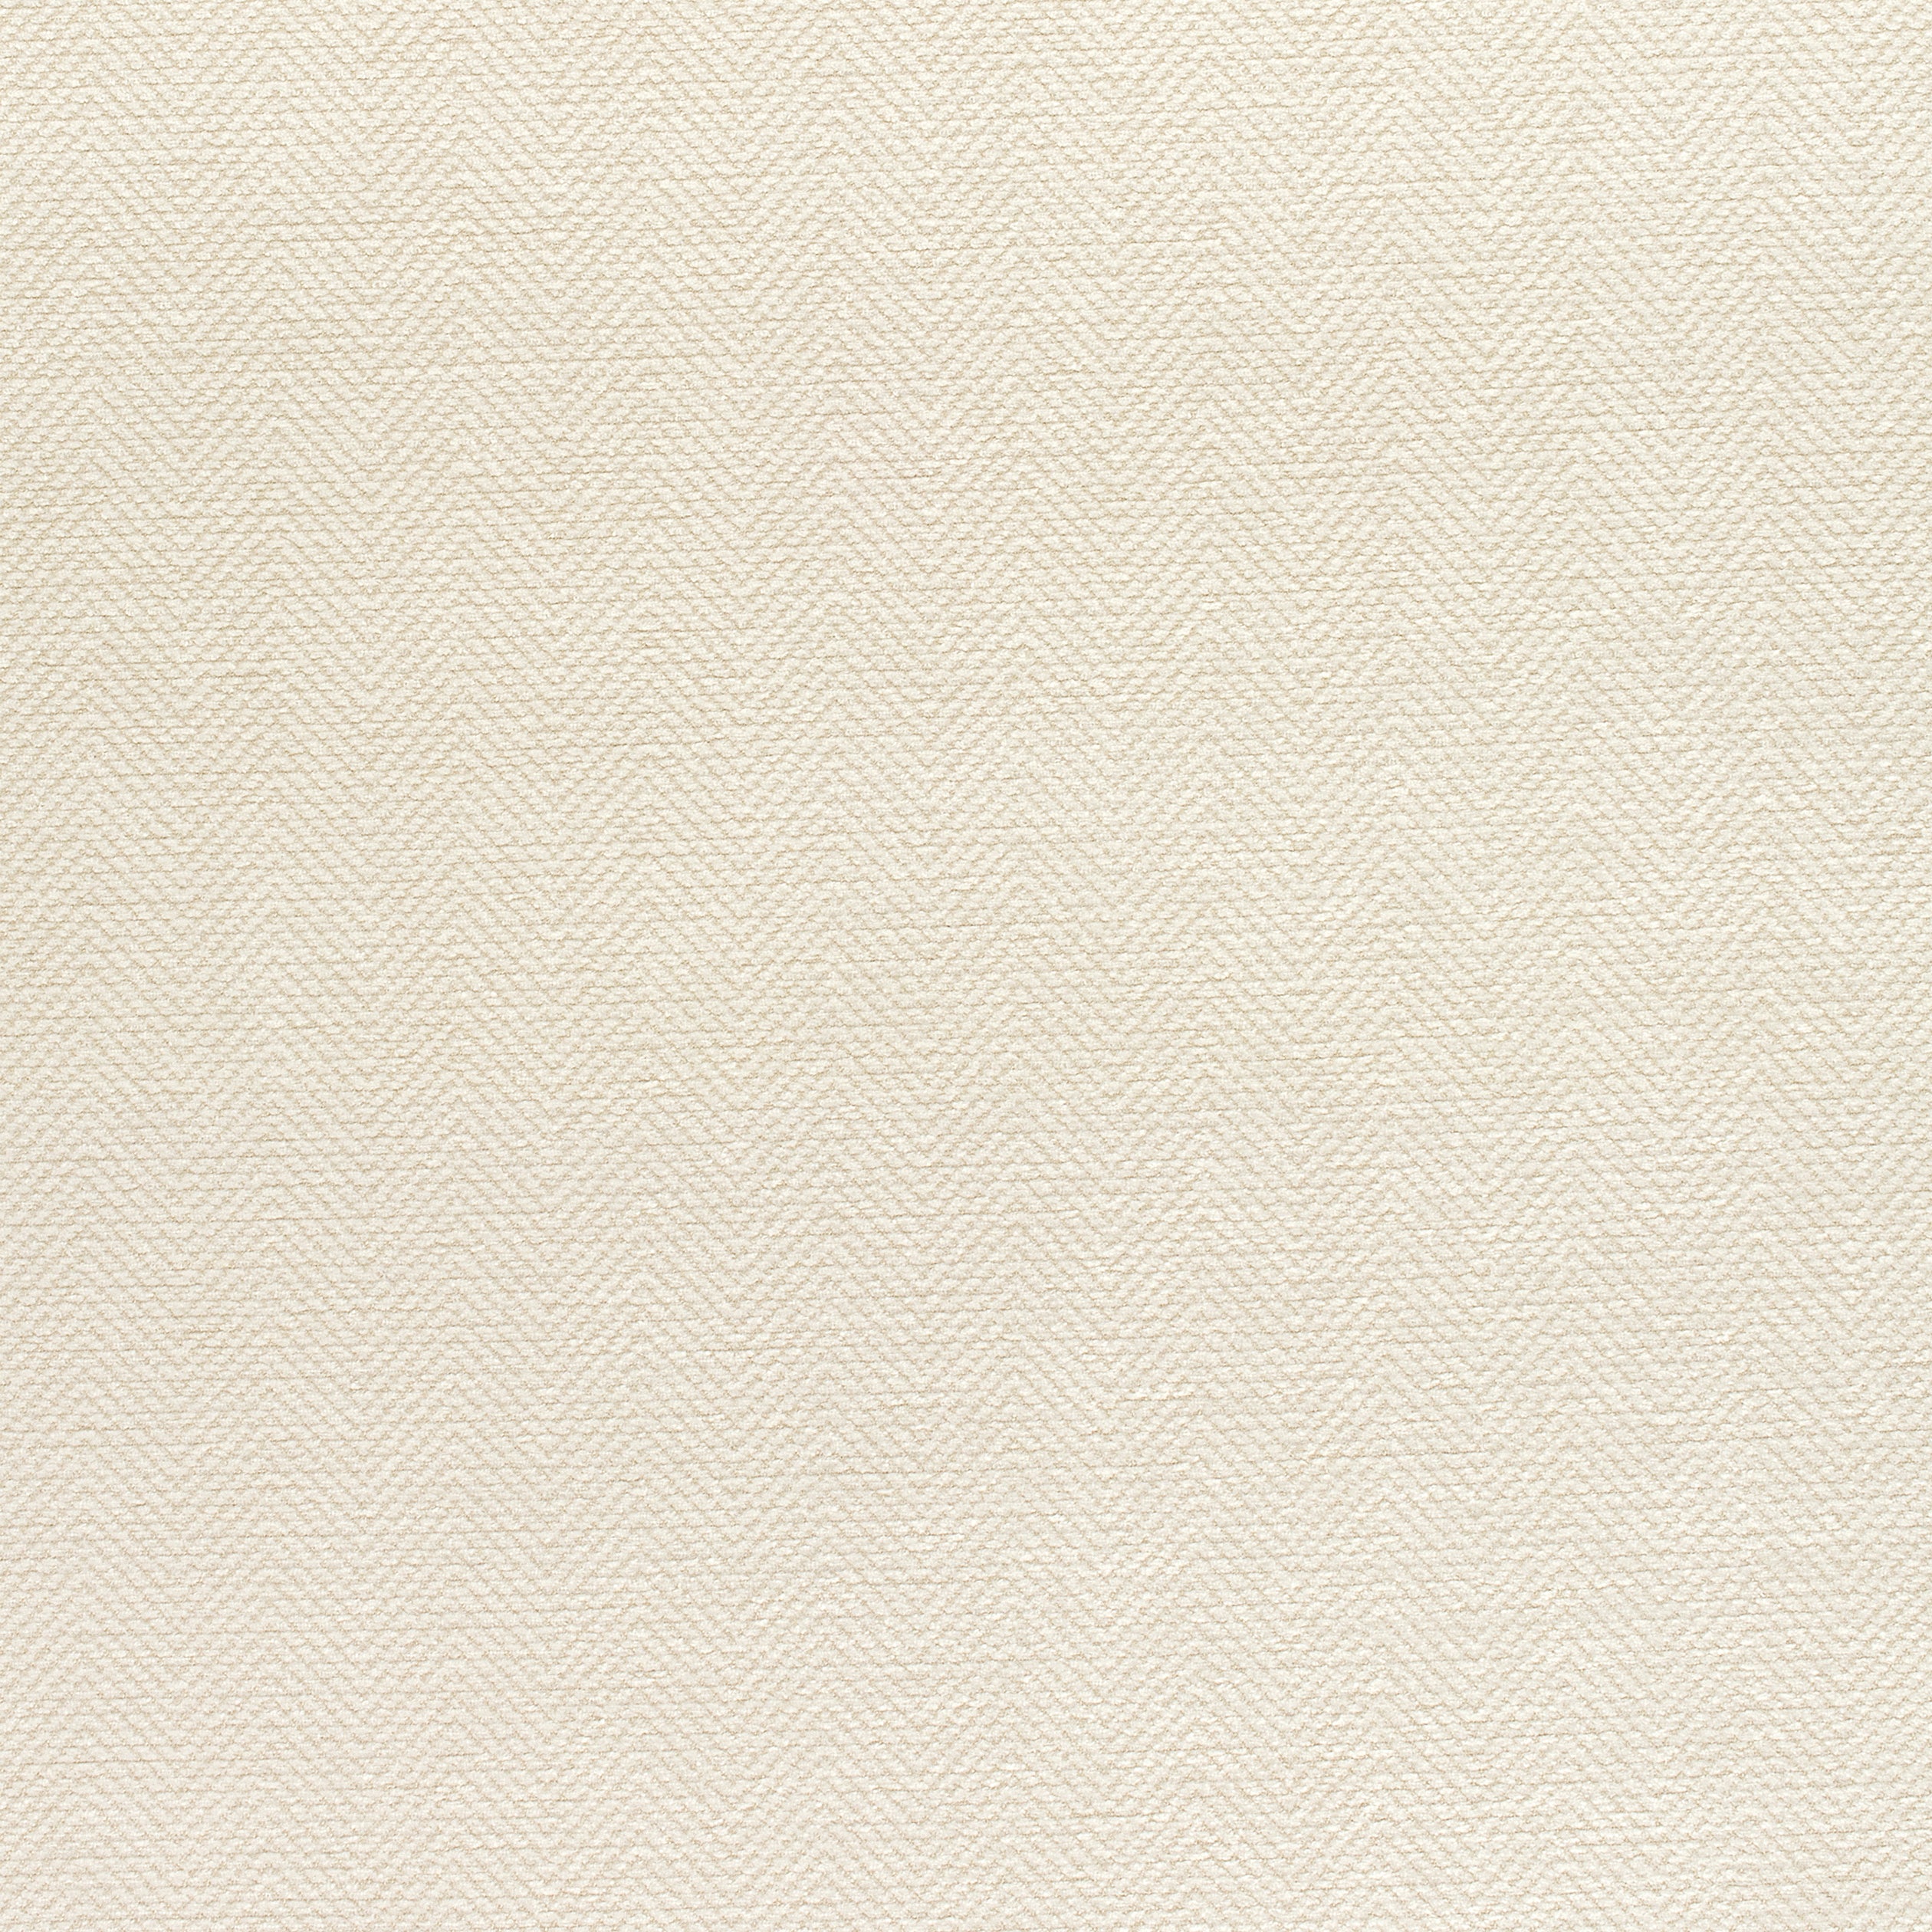 Bronwyn Herringbone fabric in flax color - pattern number W80682 - by Thibaut in the Pinnacle collection